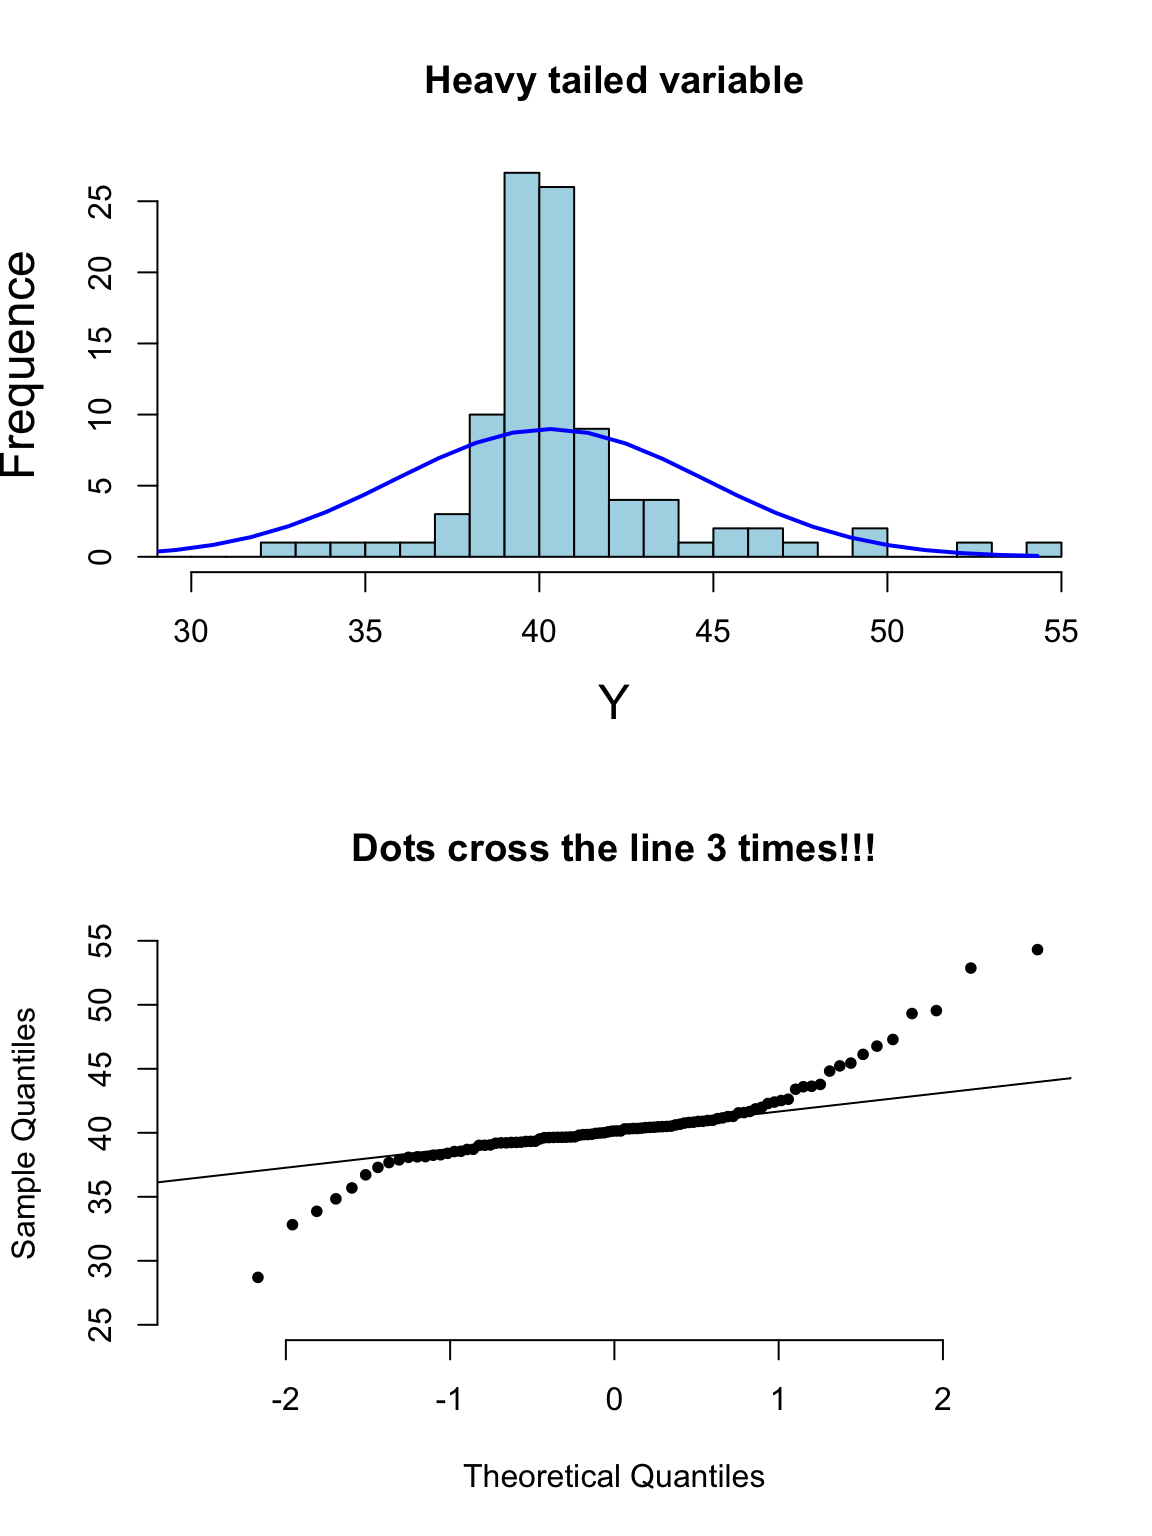 Appearance of histogram and normal plot for a heavy tailed variable